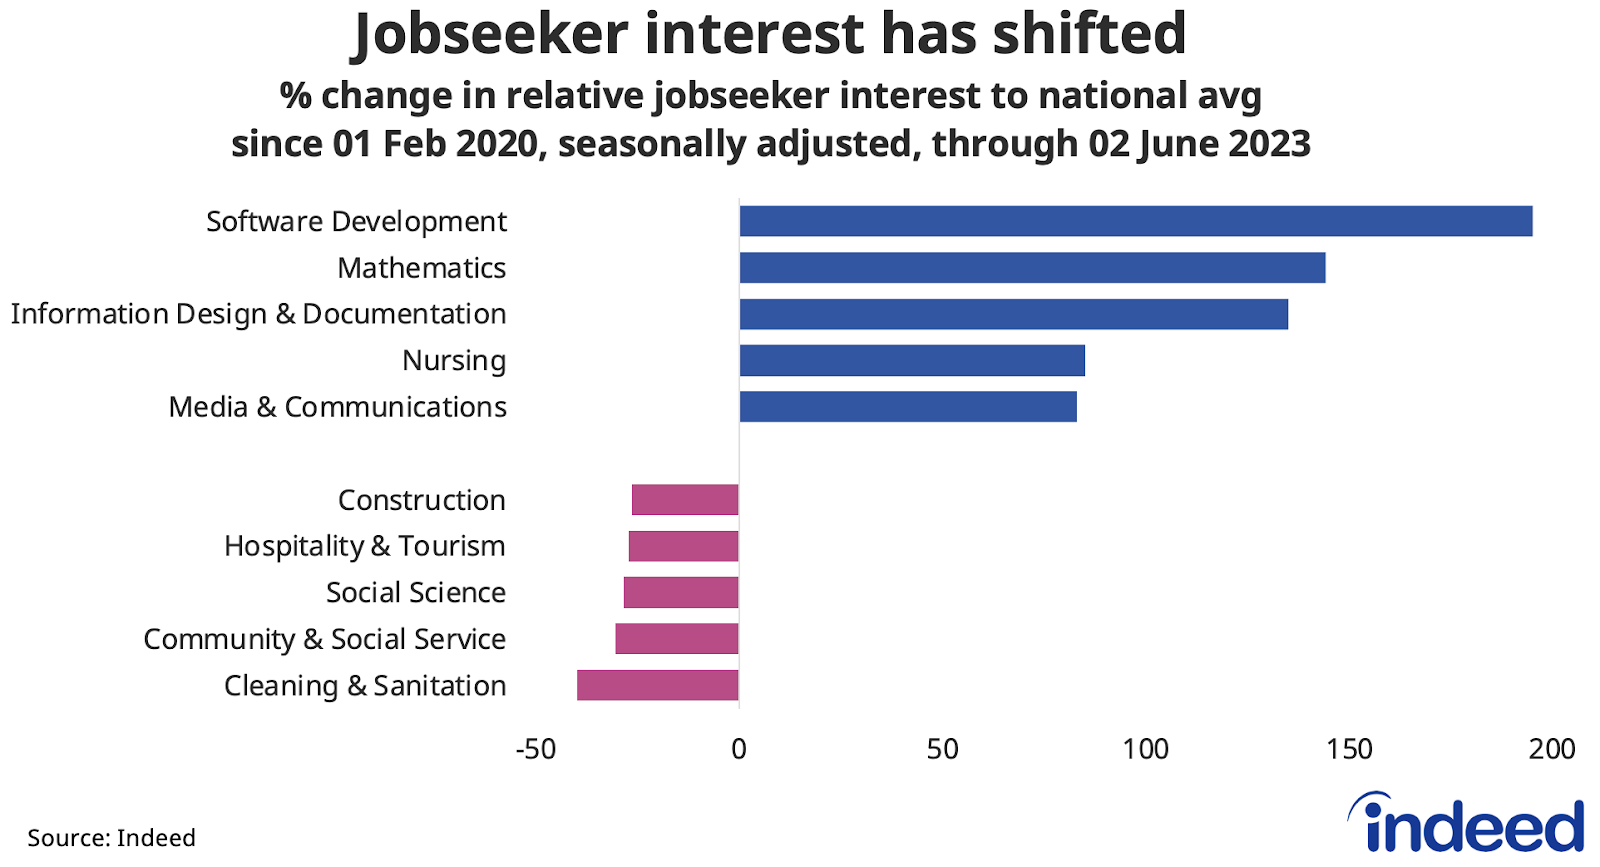 Bar chart titled “Jobseeker interest has shifted” showing the change in relative jobseeker interest across certain occupations between 1 February 2020 and 2 June 2023. Software development saw the biggest increase in relative jobseeker interest, while cleaning & sanitation saw the biggest decline. 